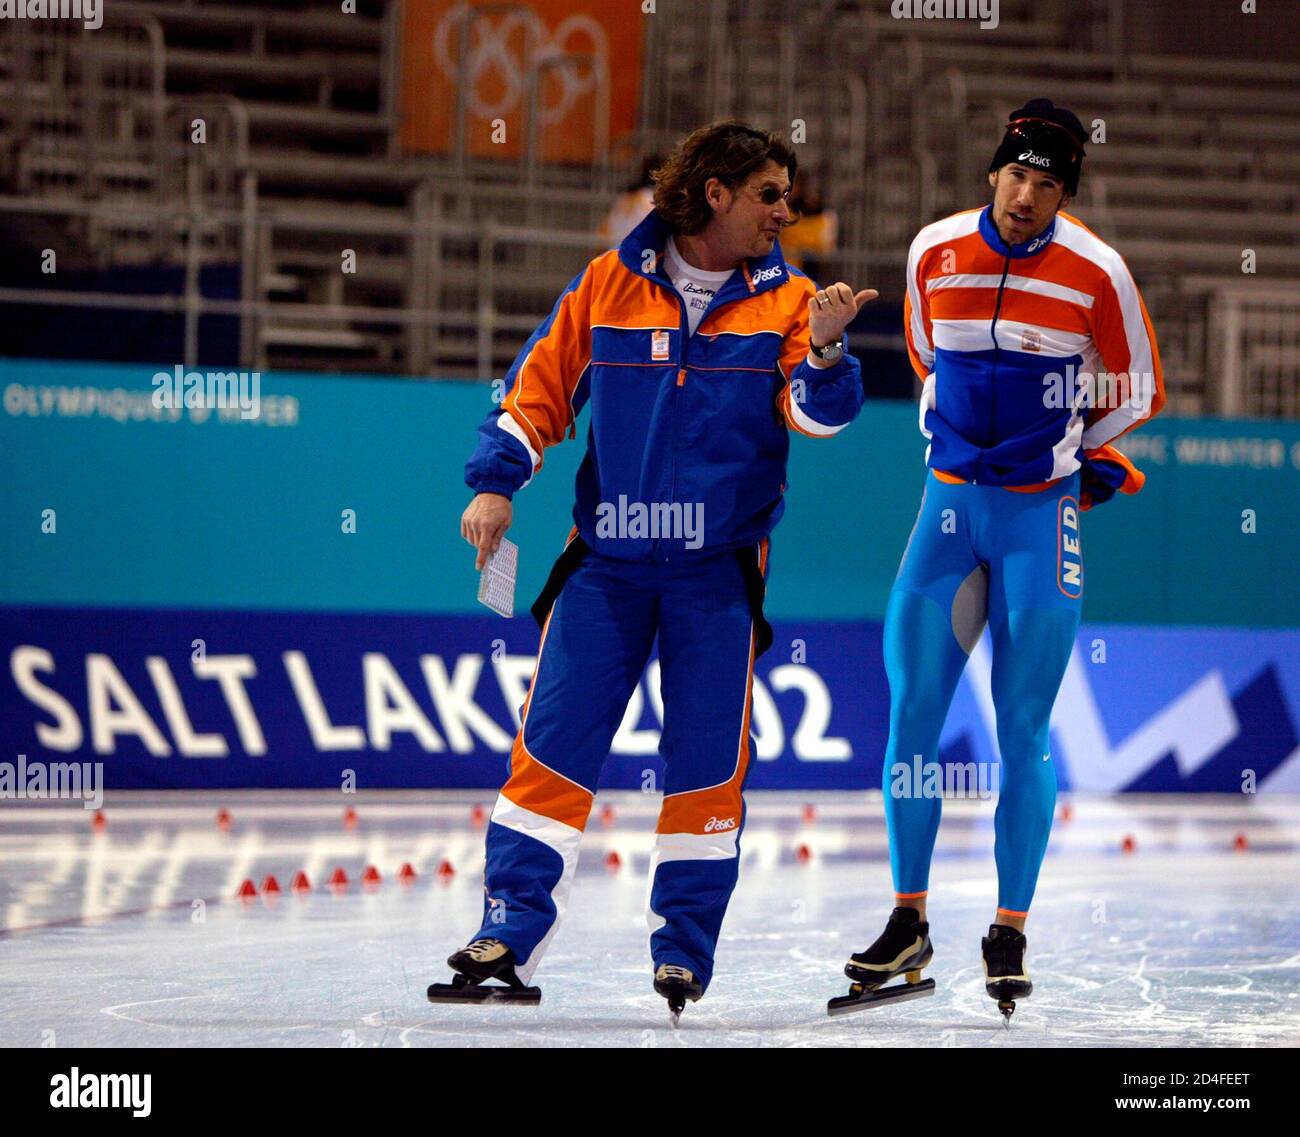 Dutch speed skater Gianni Romme (R) talks to his coach, American Peter  Mueller (R), in the Olympic speedskating stadium in Salt Lake City,  February 2, 2002. The XIX Winter Olympic Games will